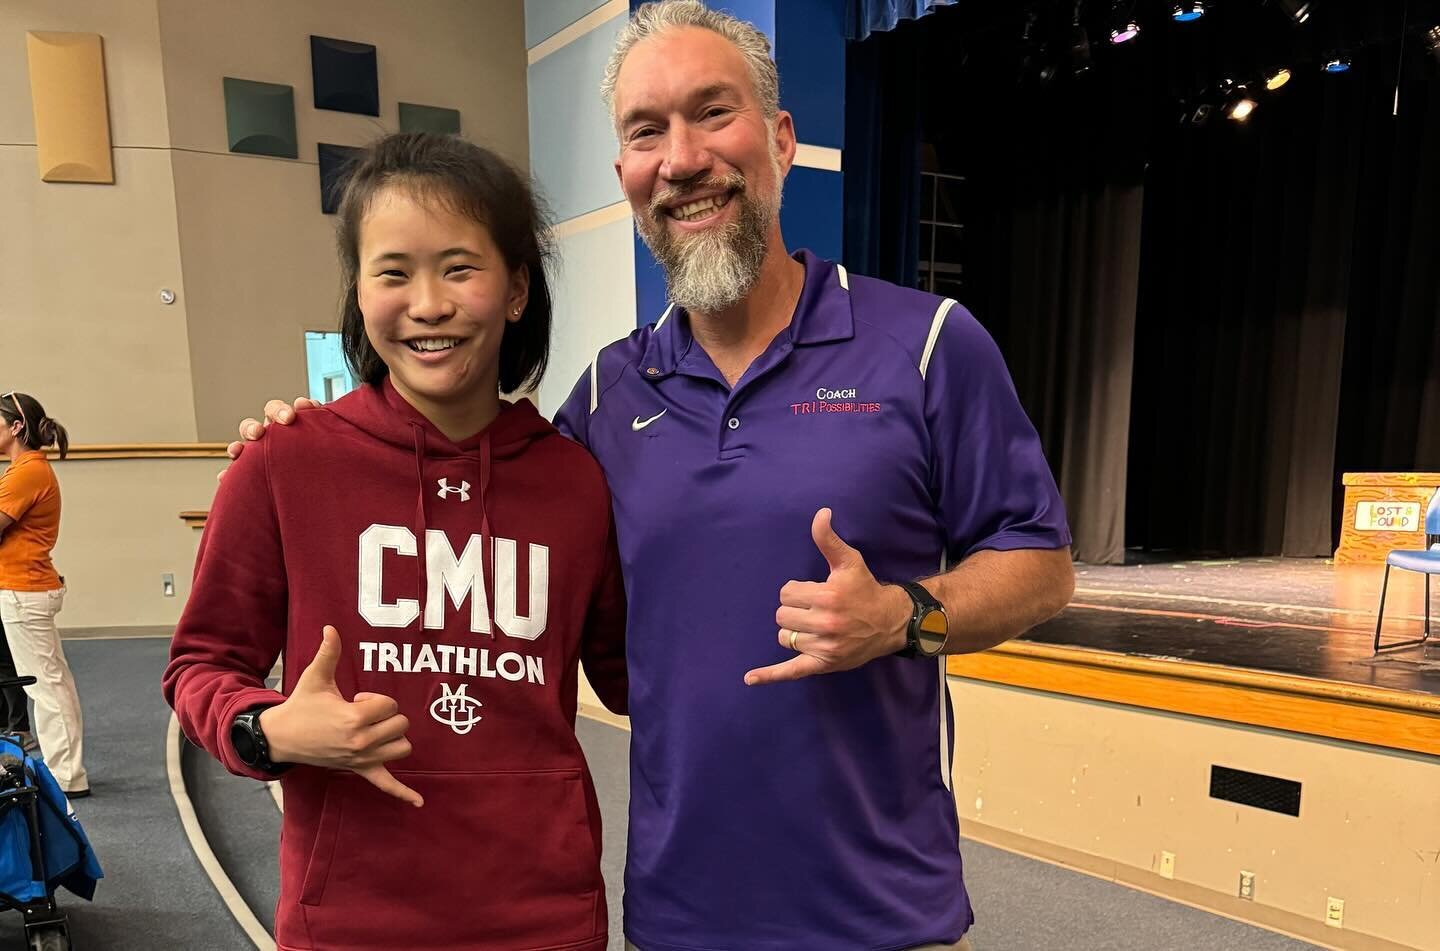 So today we got to celebrate Emma @emmameyerstri15 making history as she signed with Colorado Mesa @cmu_triathlon  as the first #paraathlete to sign on to a NCAA Triathlon Varsity level

#triposse #tpc #finishstrong #tricoaching  #purplepower #triath